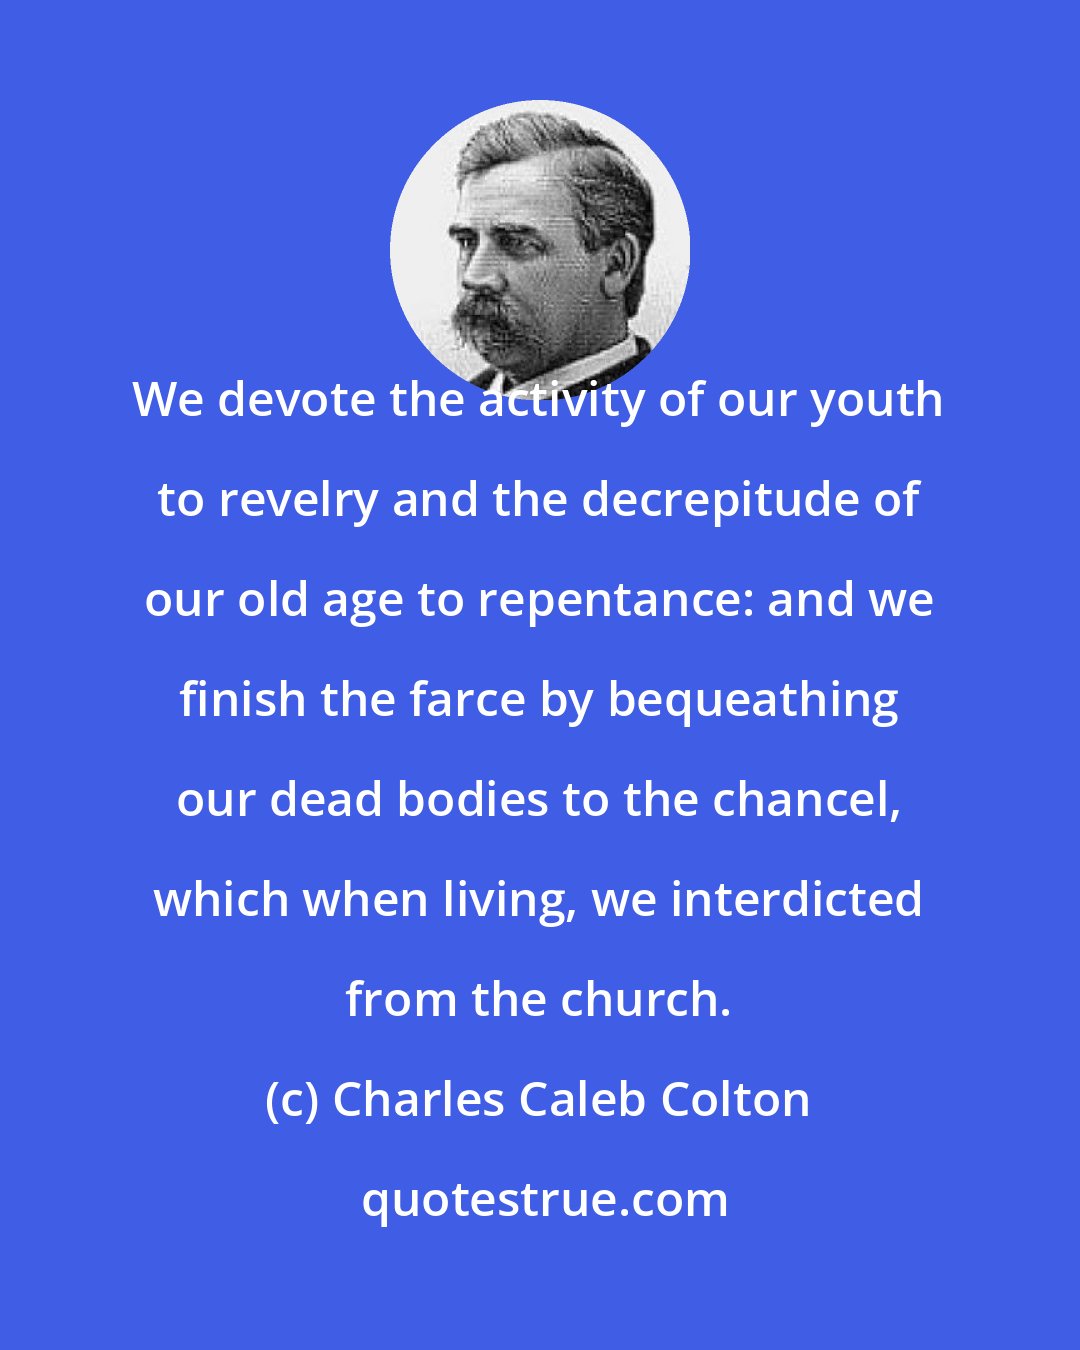 Charles Caleb Colton: We devote the activity of our youth to revelry and the decrepitude of our old age to repentance: and we finish the farce by bequeathing our dead bodies to the chancel, which when living, we interdicted from the church.